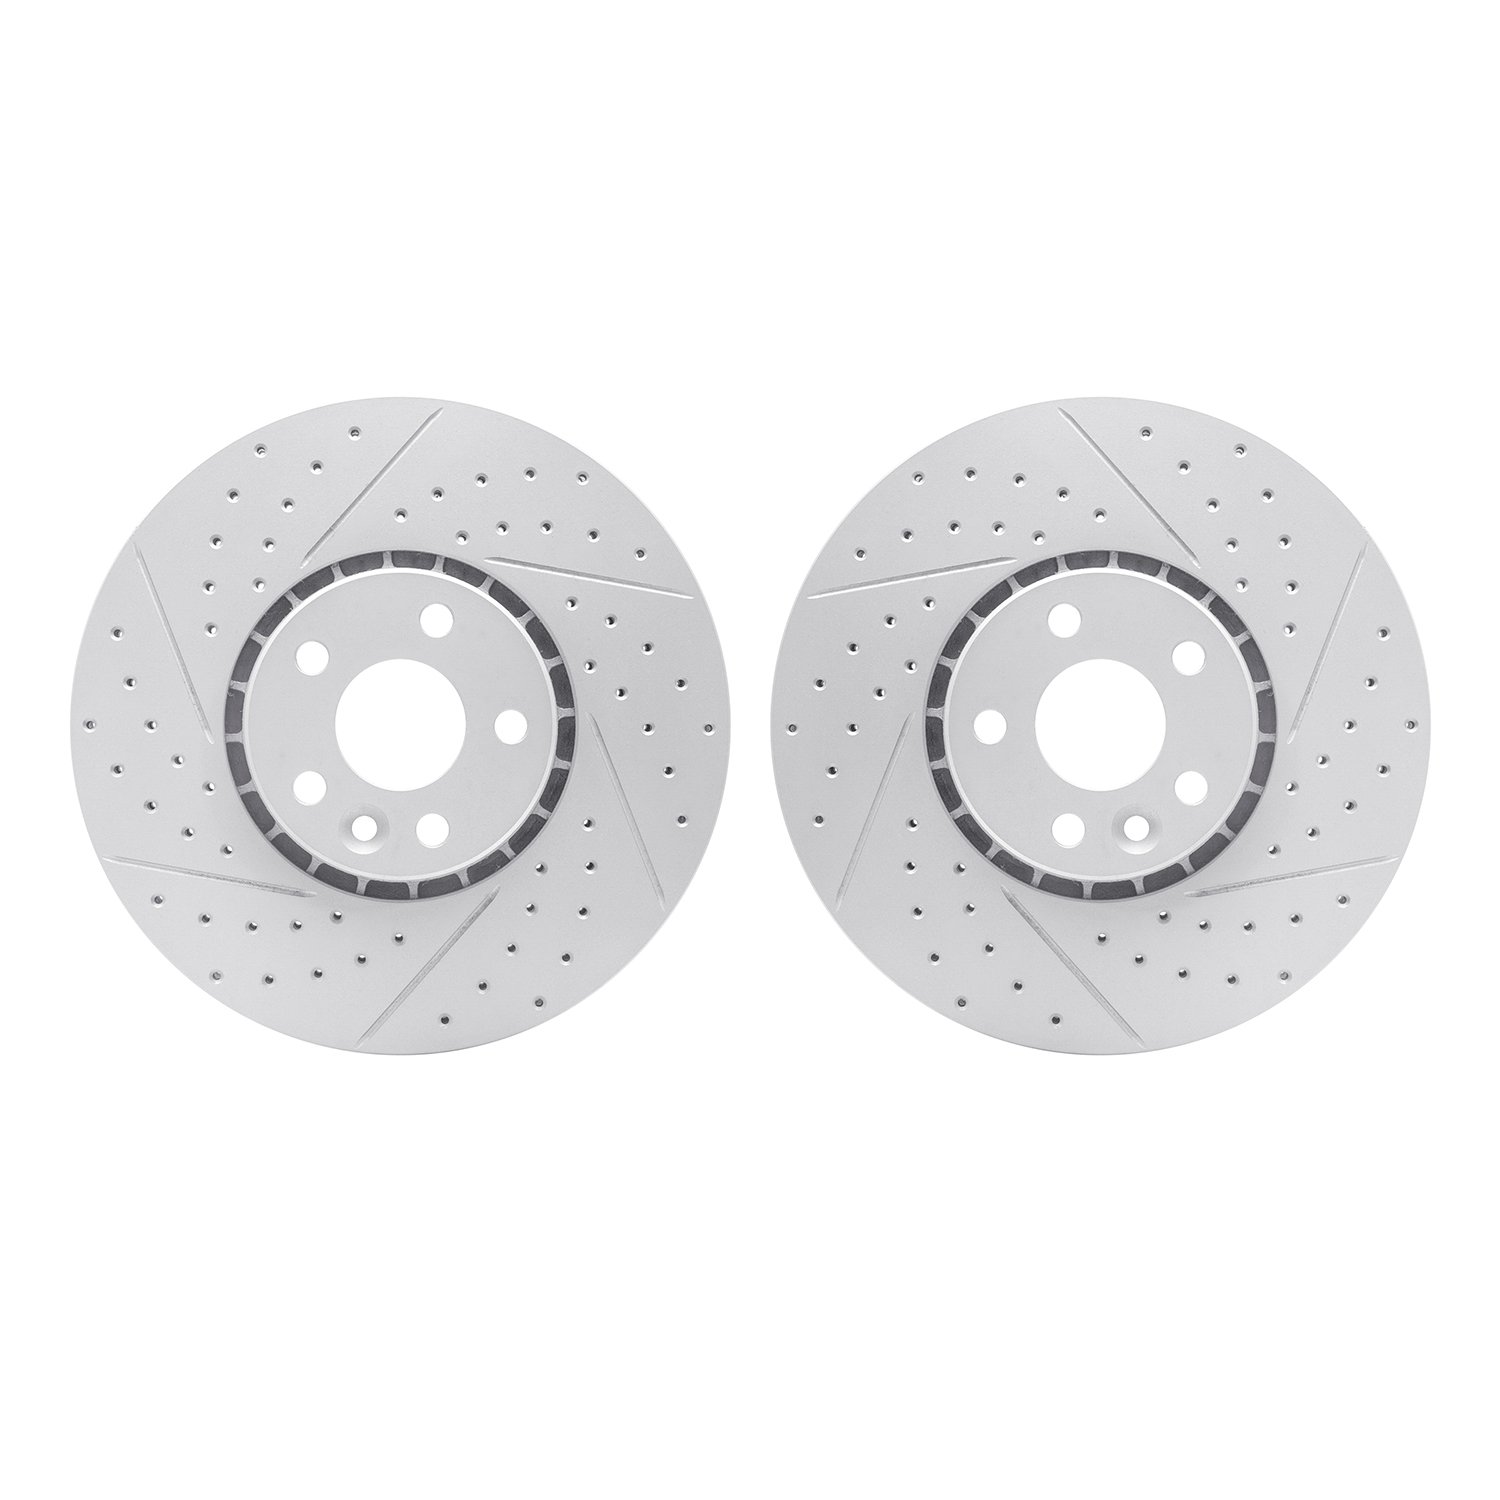 2002-27016 Geoperformance Drilled/Slotted Brake Rotors, 2010-2016 Volvo, Position: Front